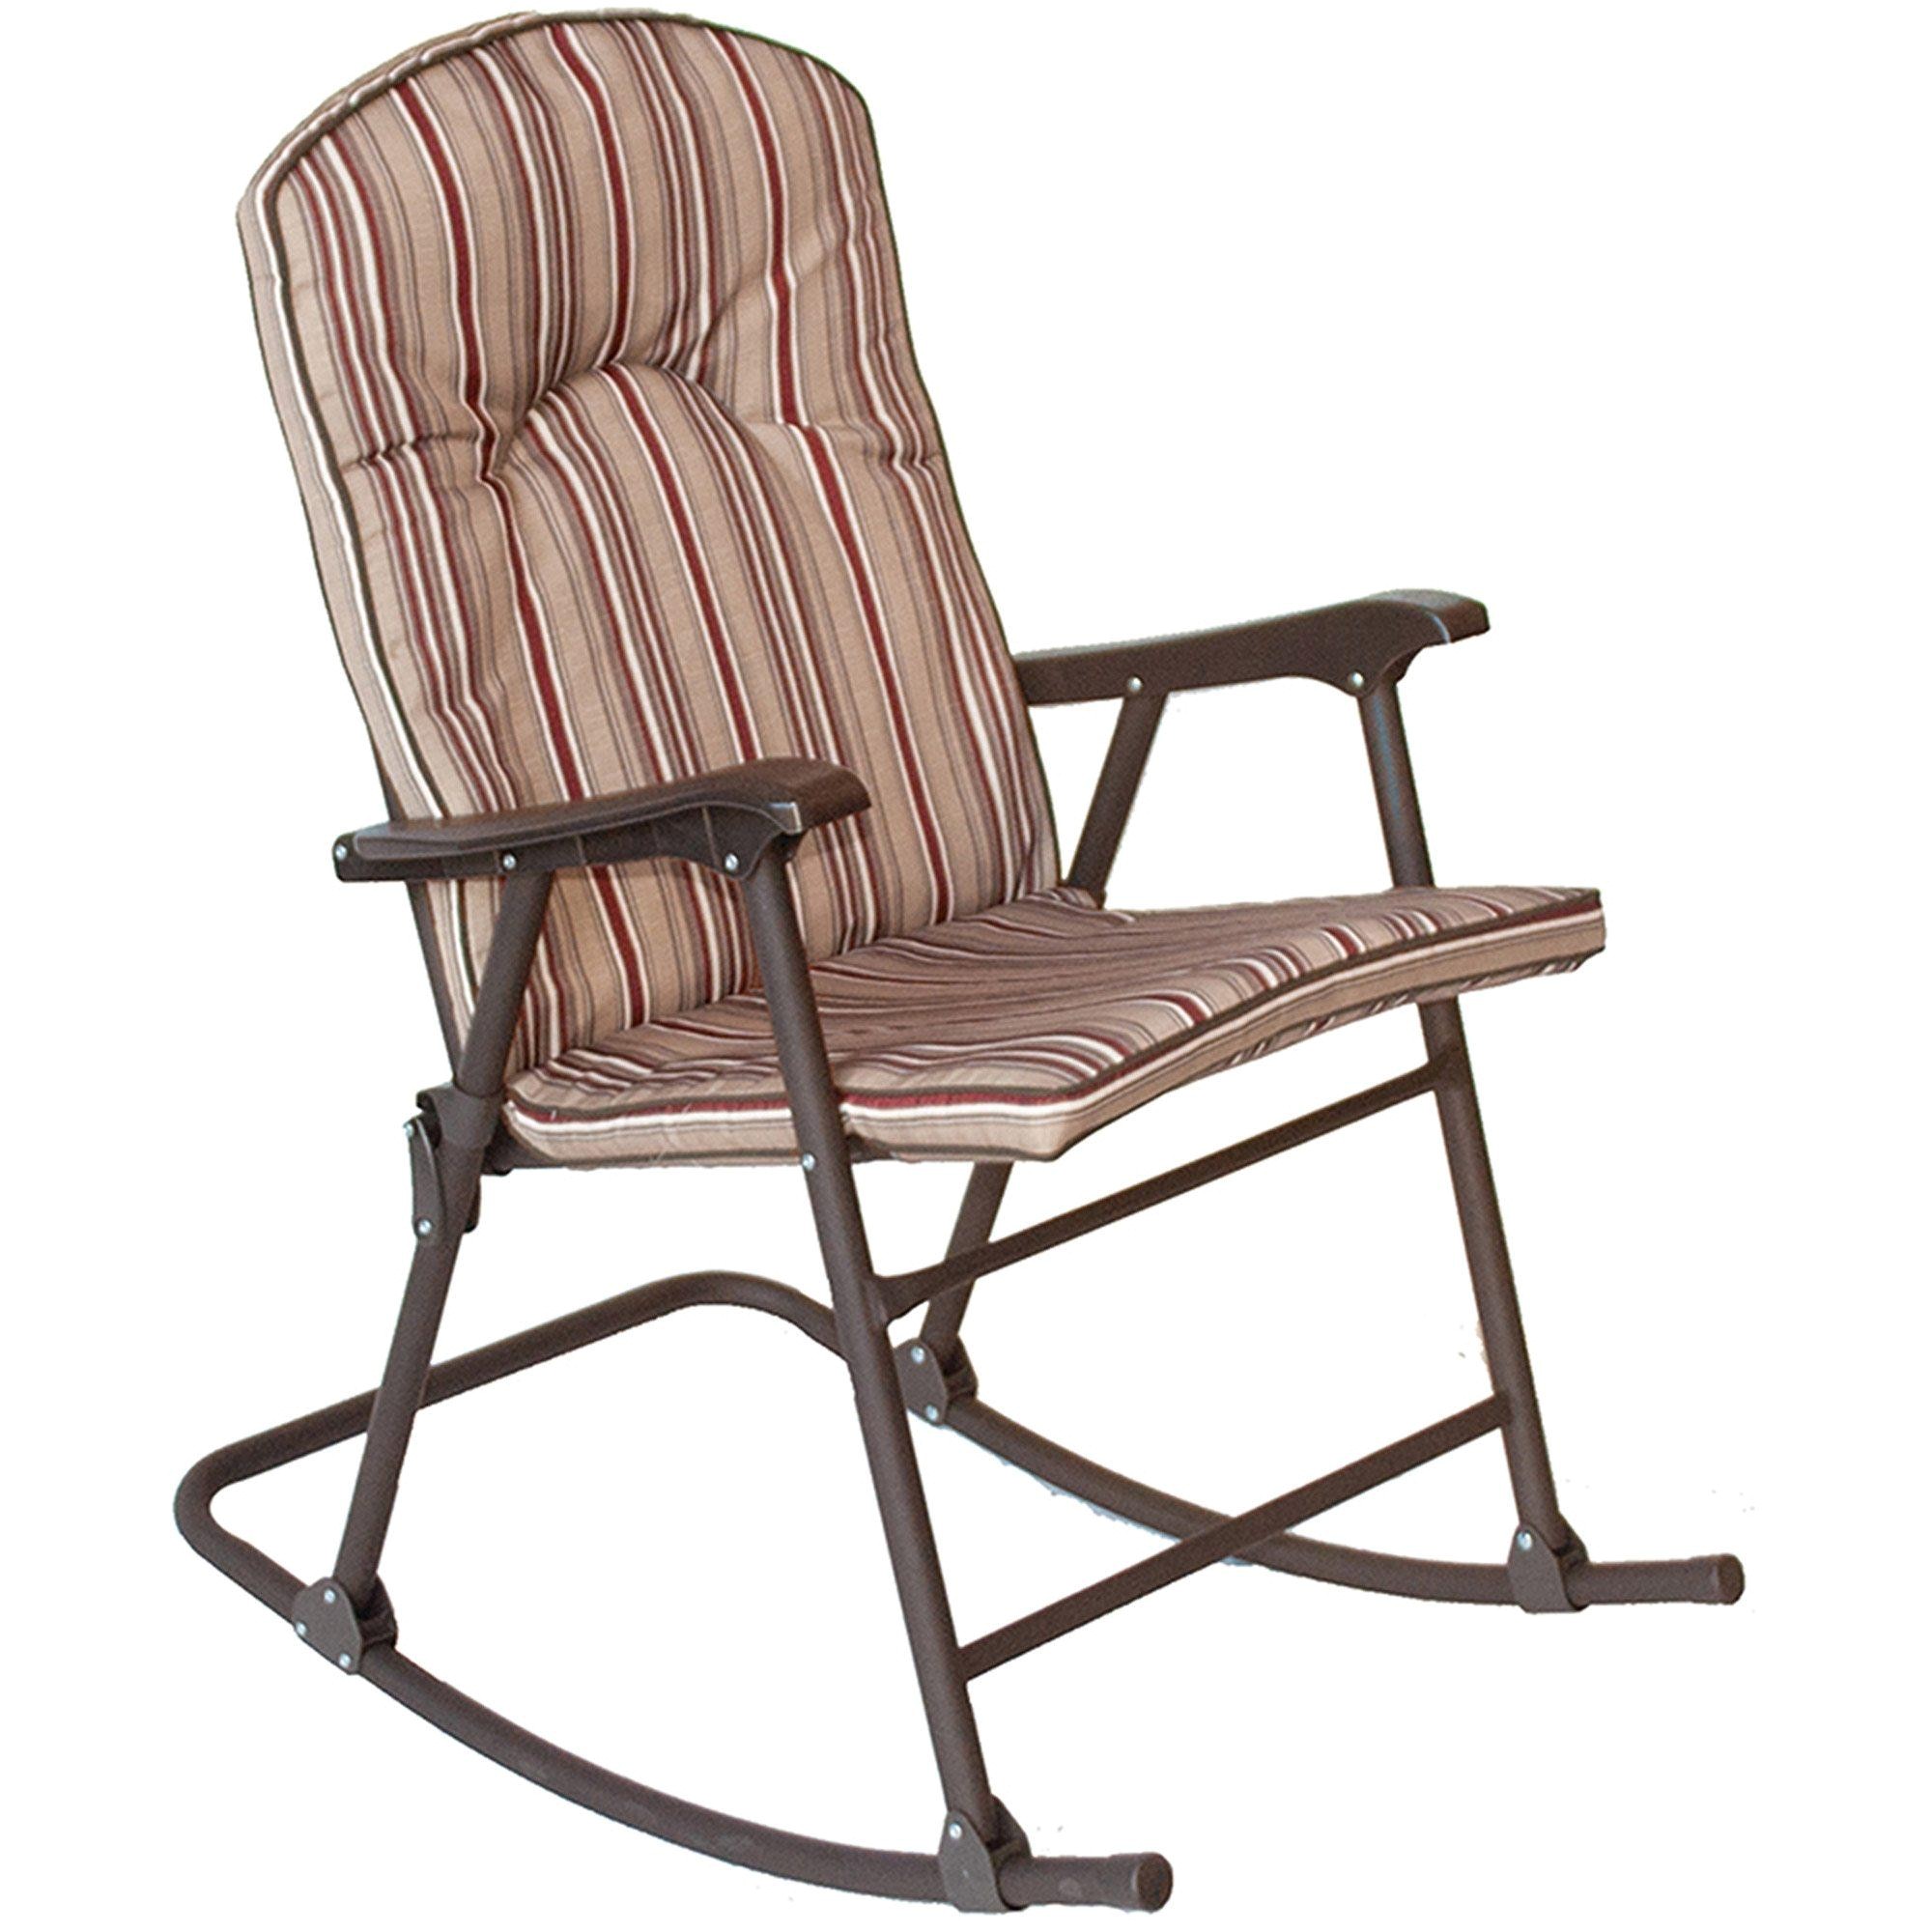 folding rocking chair decor references rocking outdoor chair rocking lawn chair academy